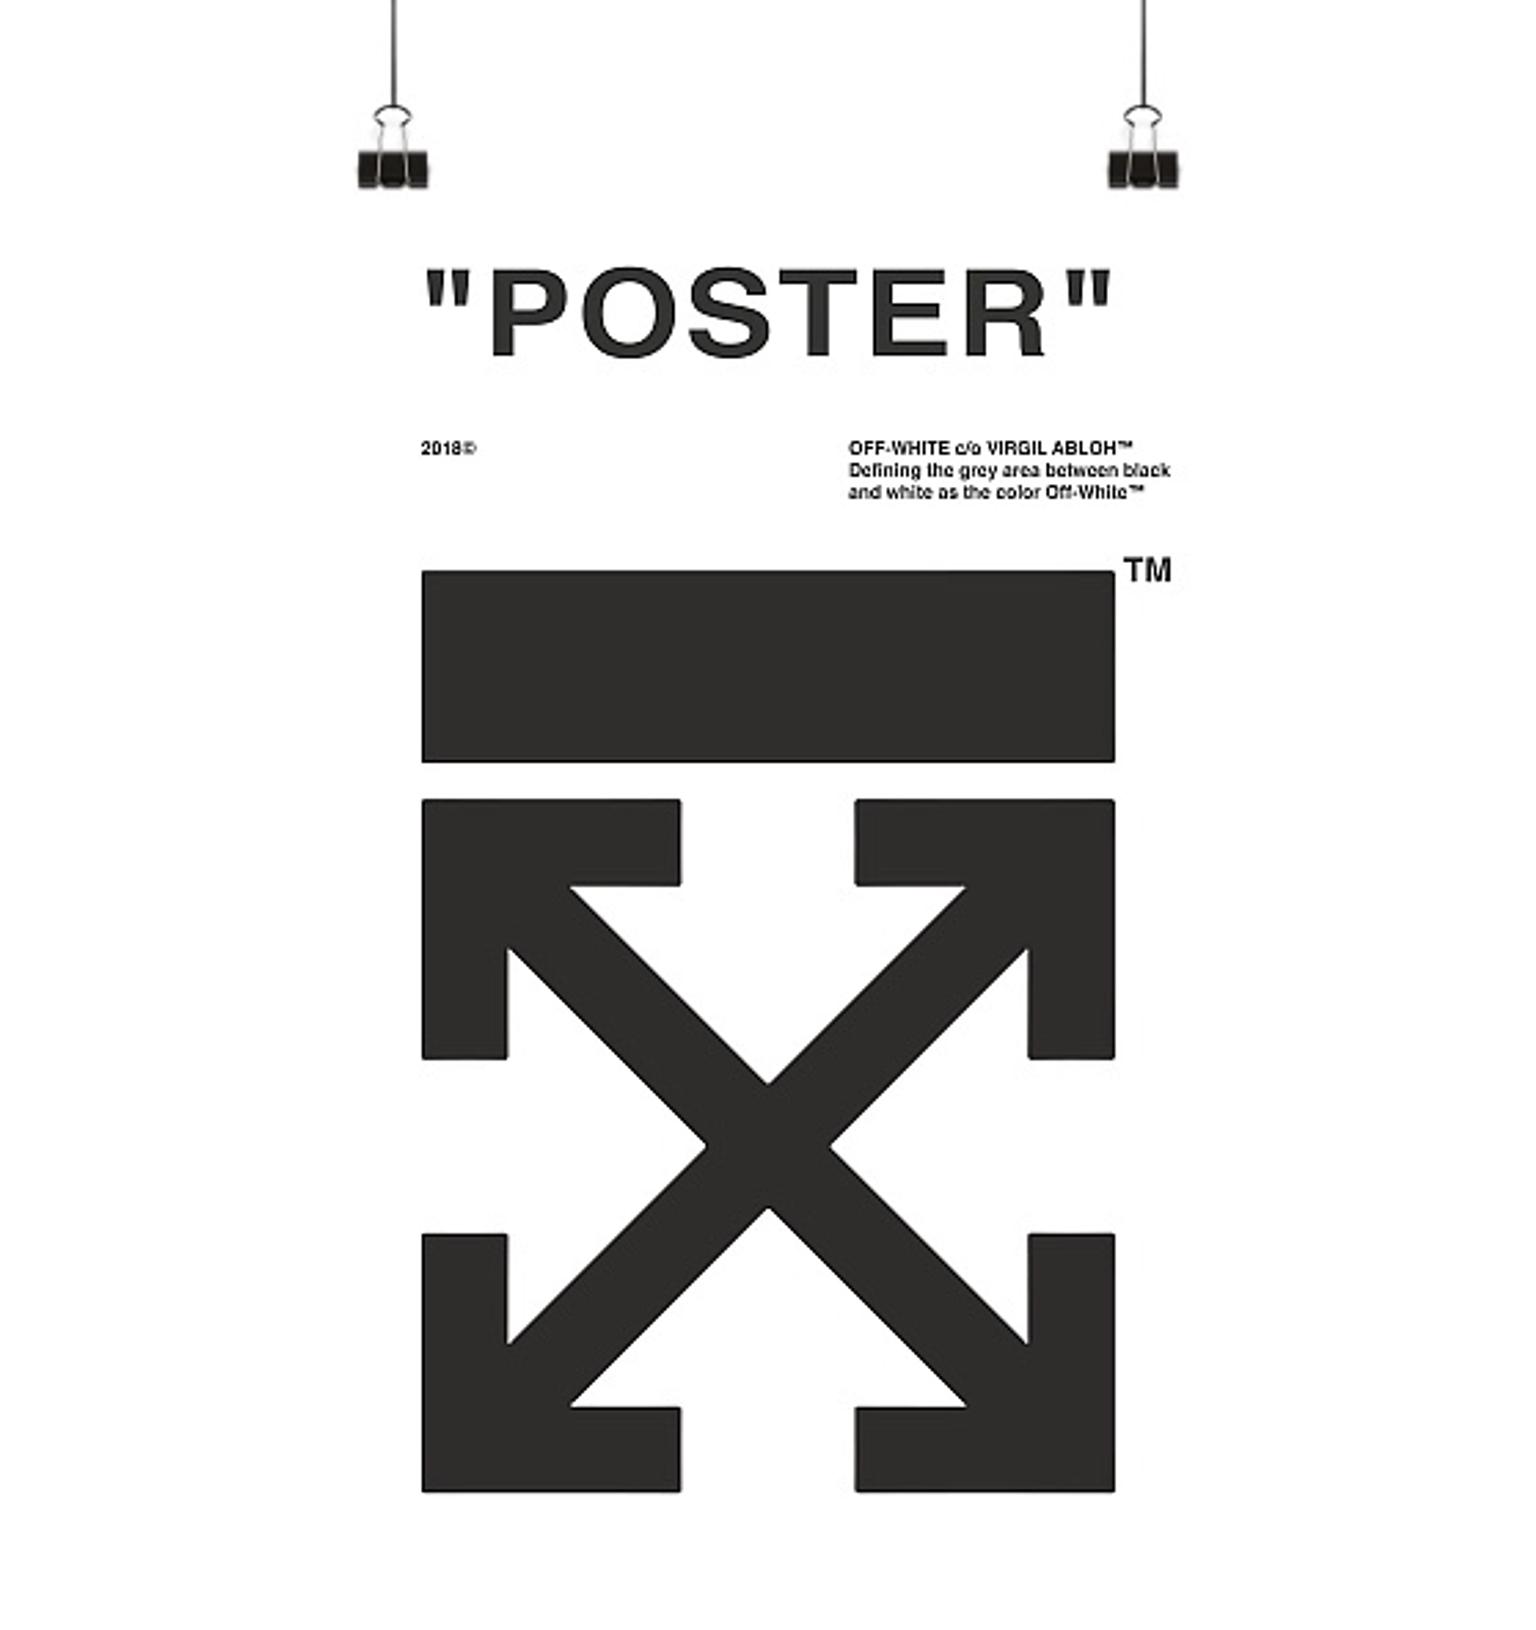 Off White A3 Poster In 40 Linz For 00 For Sale Shpock